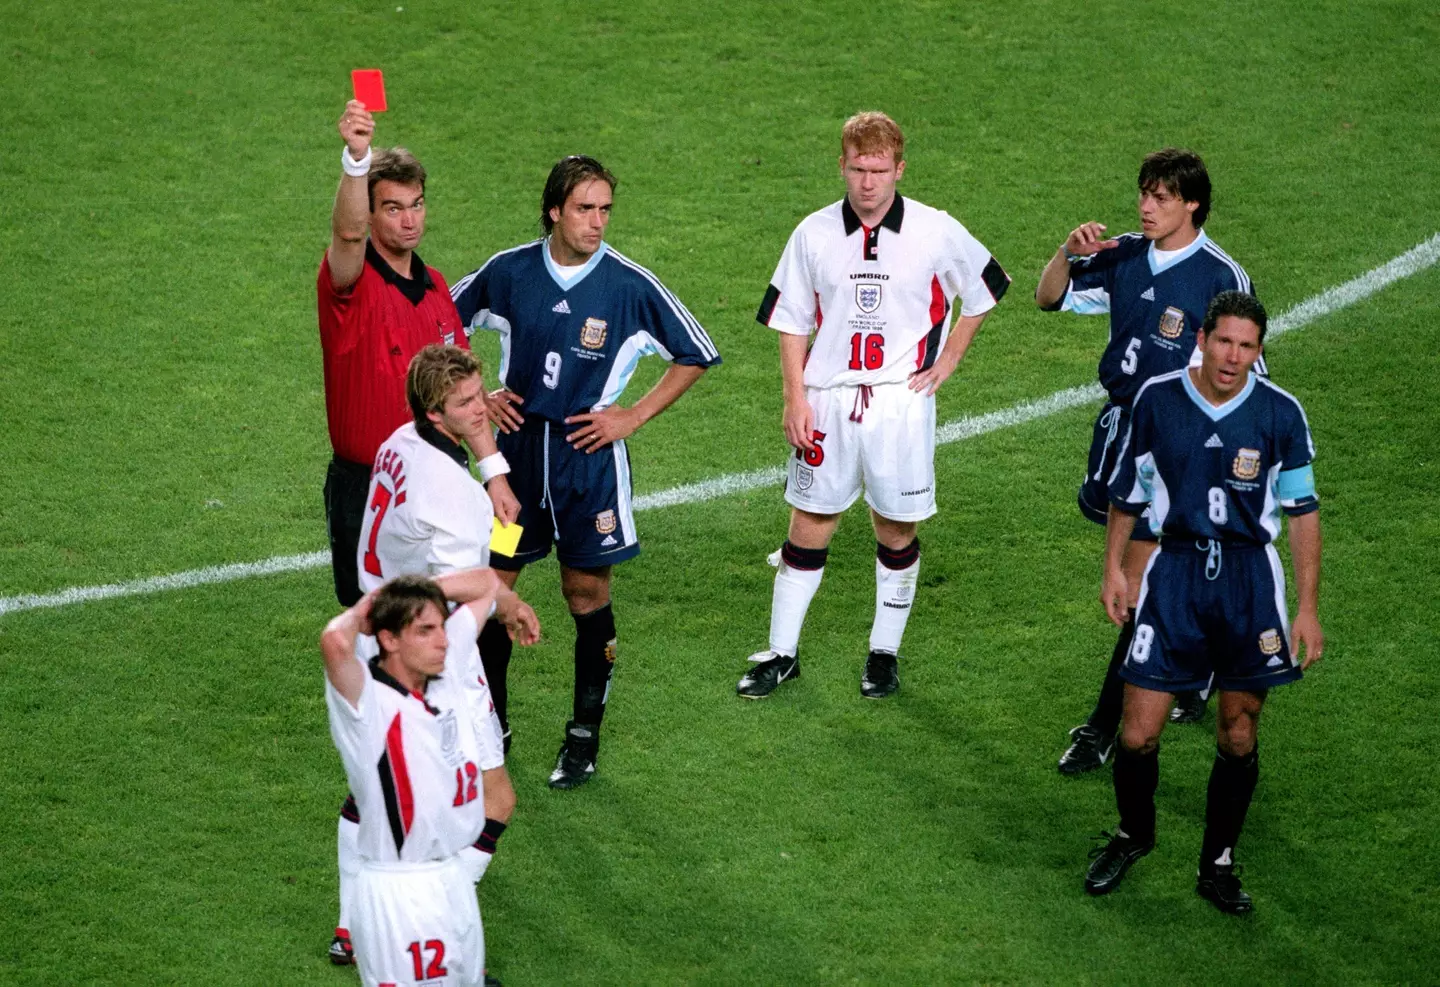 Beckham was famously red carded at the 1998 World Cup.